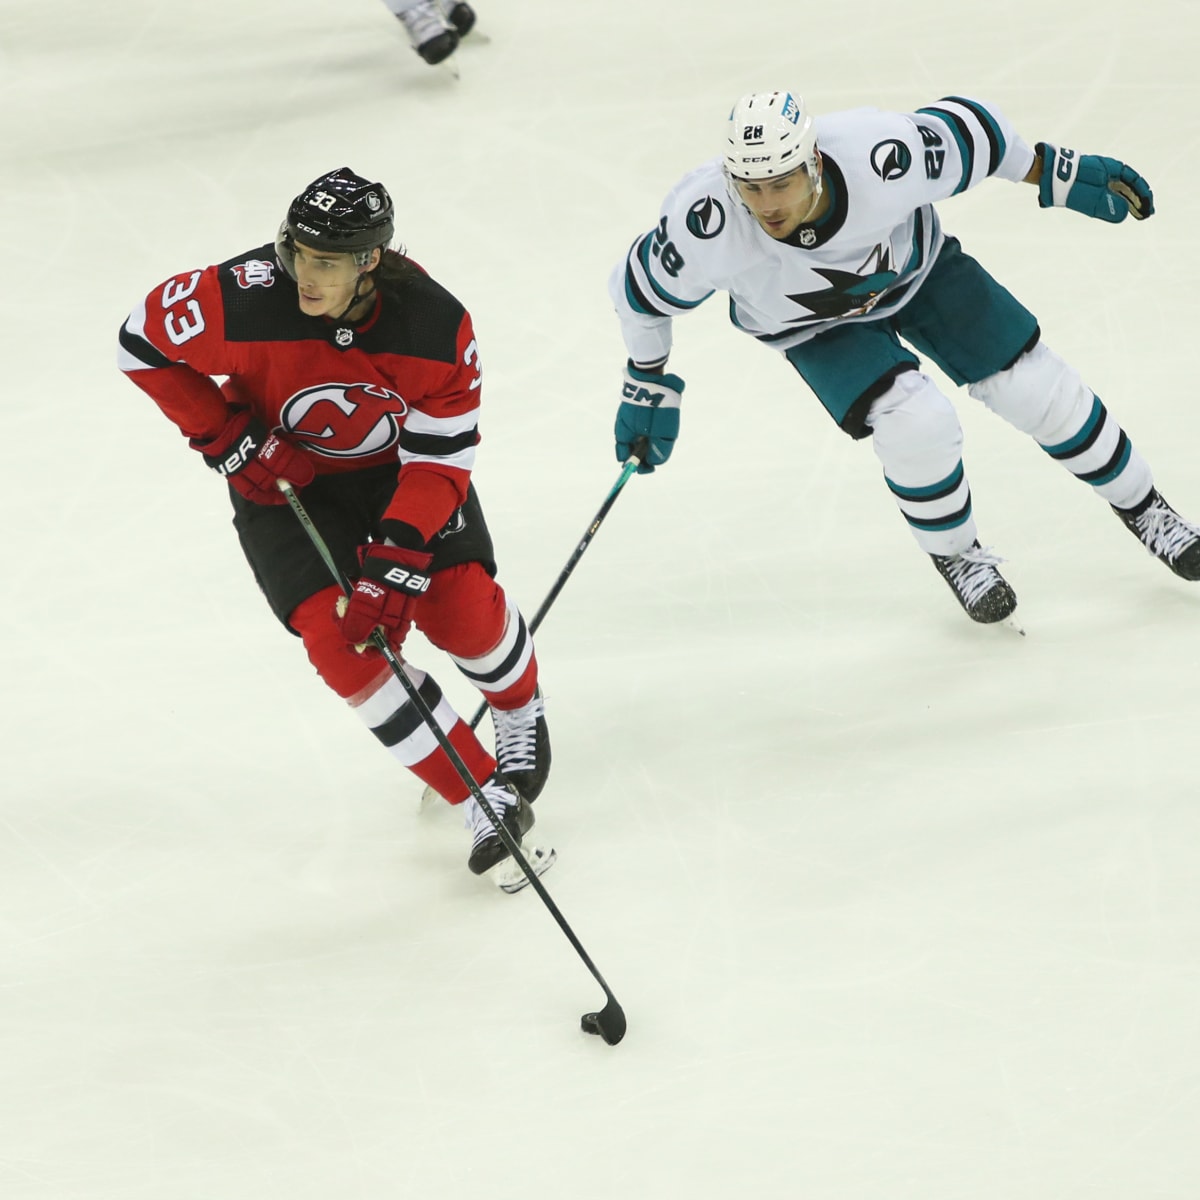 Timo Meier Devils jersey: How to get Devils gear online after blockbuster  trade with Sharks